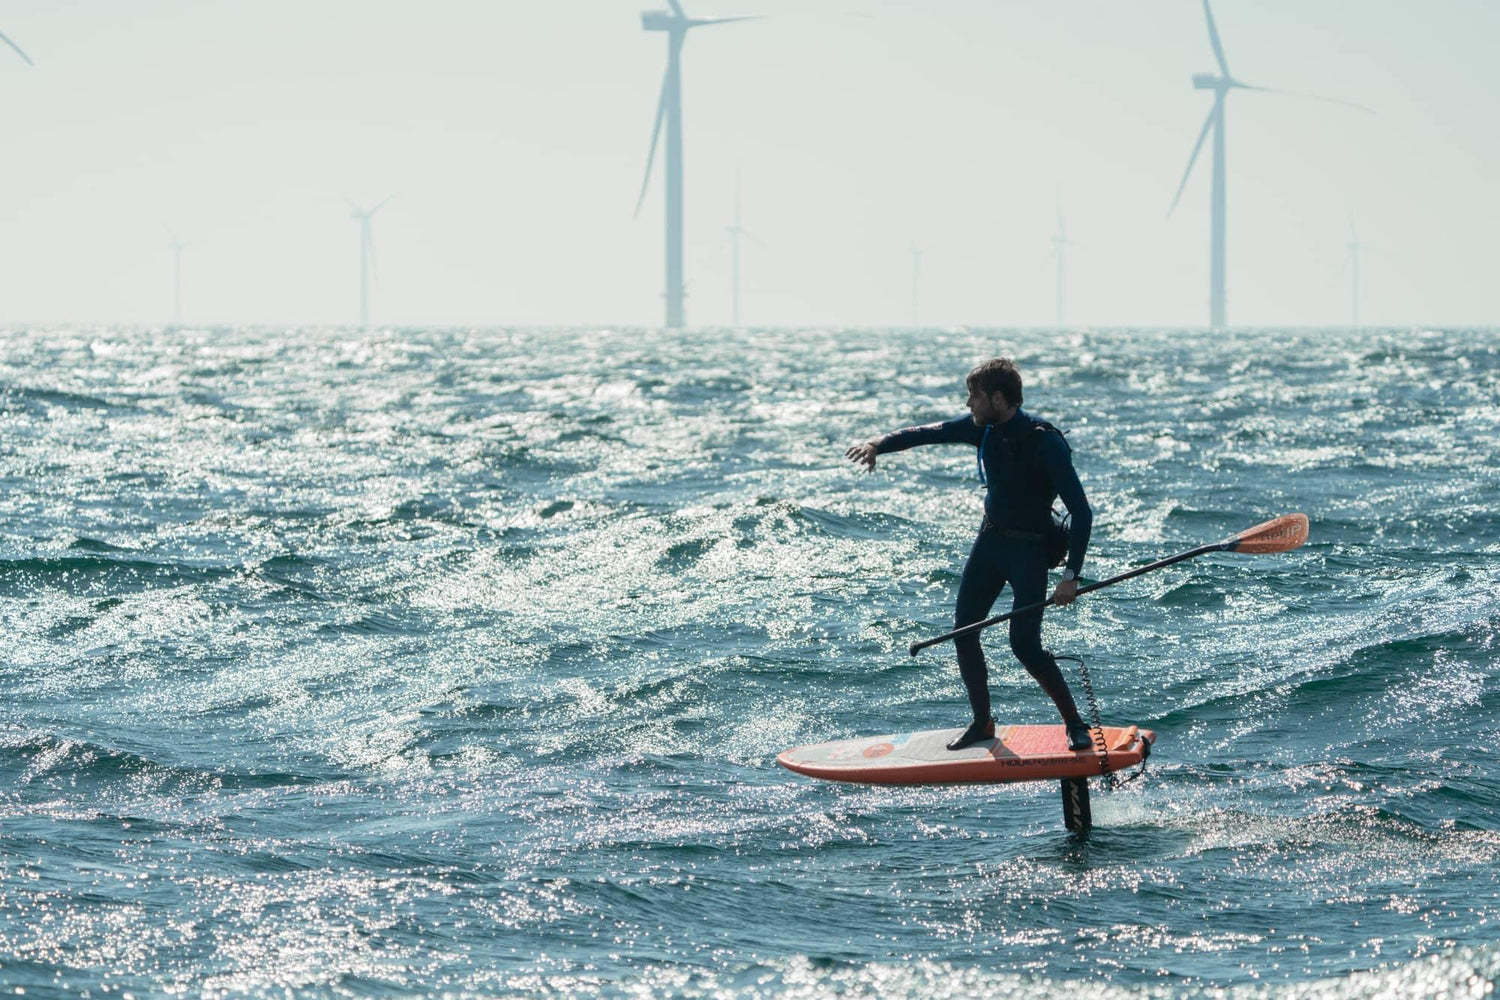 Casper Steinfath makes History as the First to Cross the Kattegat Sea by Hydrofoil - Naish.com